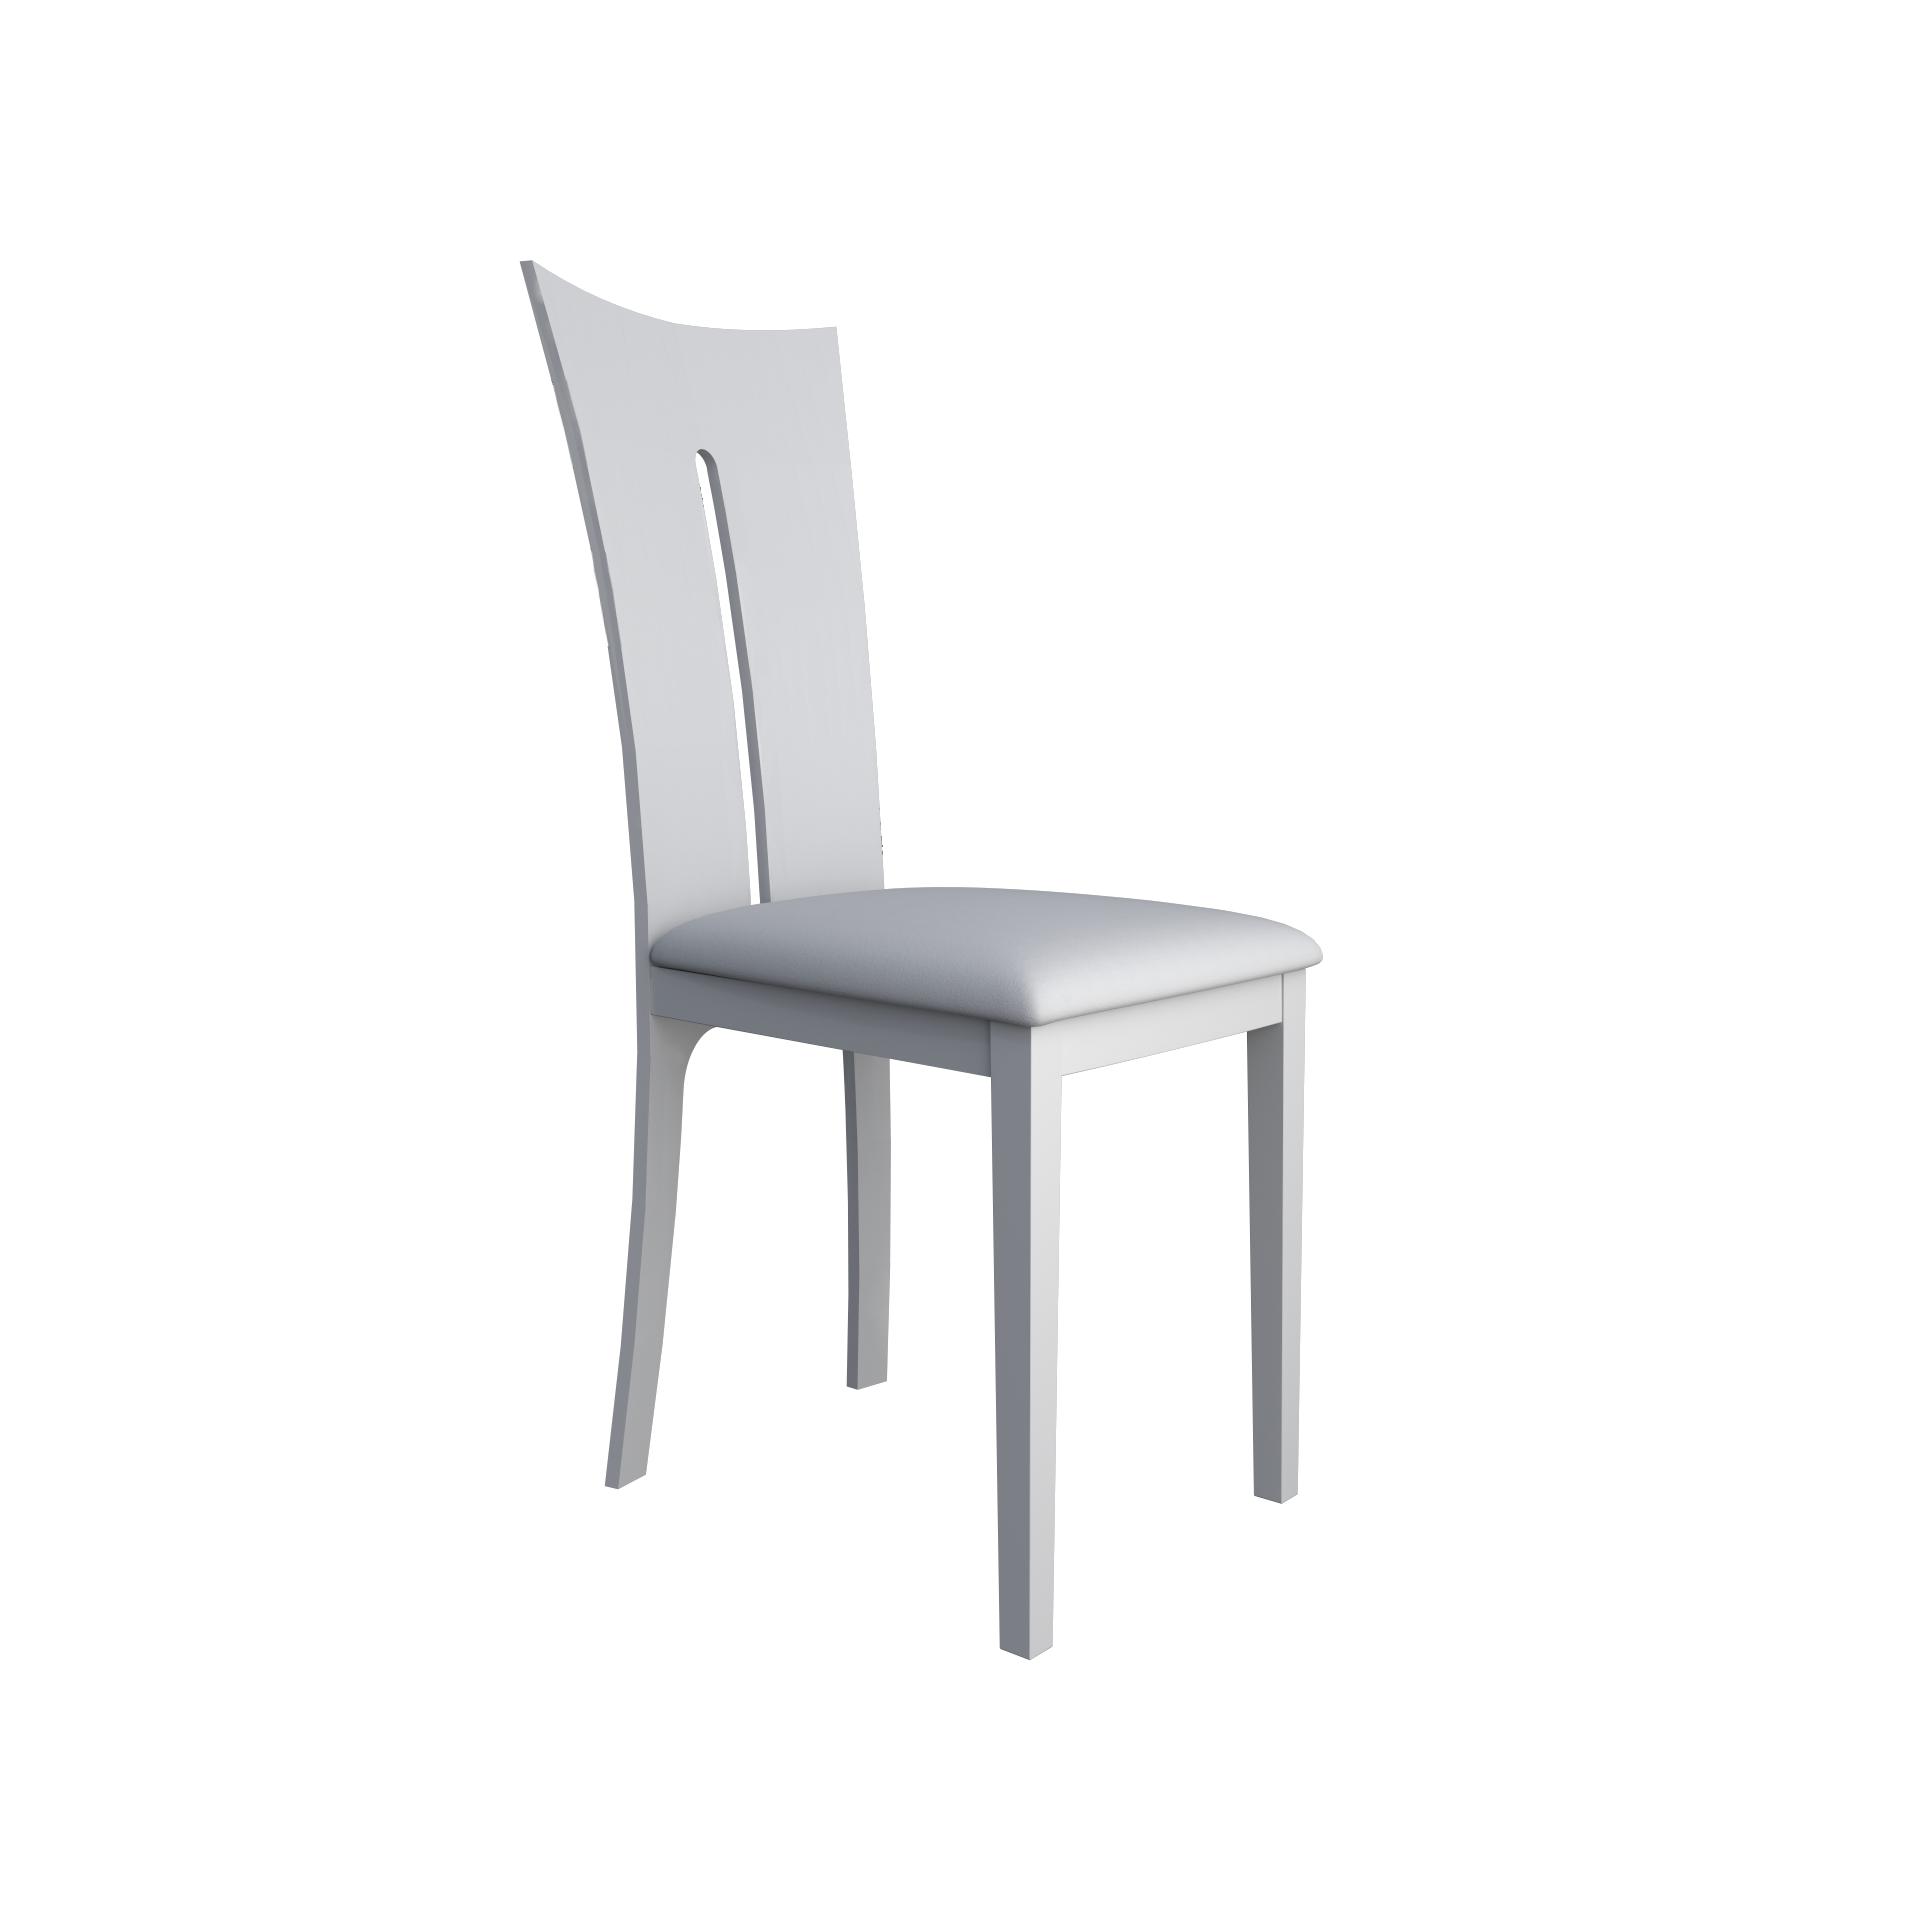 At Home USA Agata Dining Side Chair